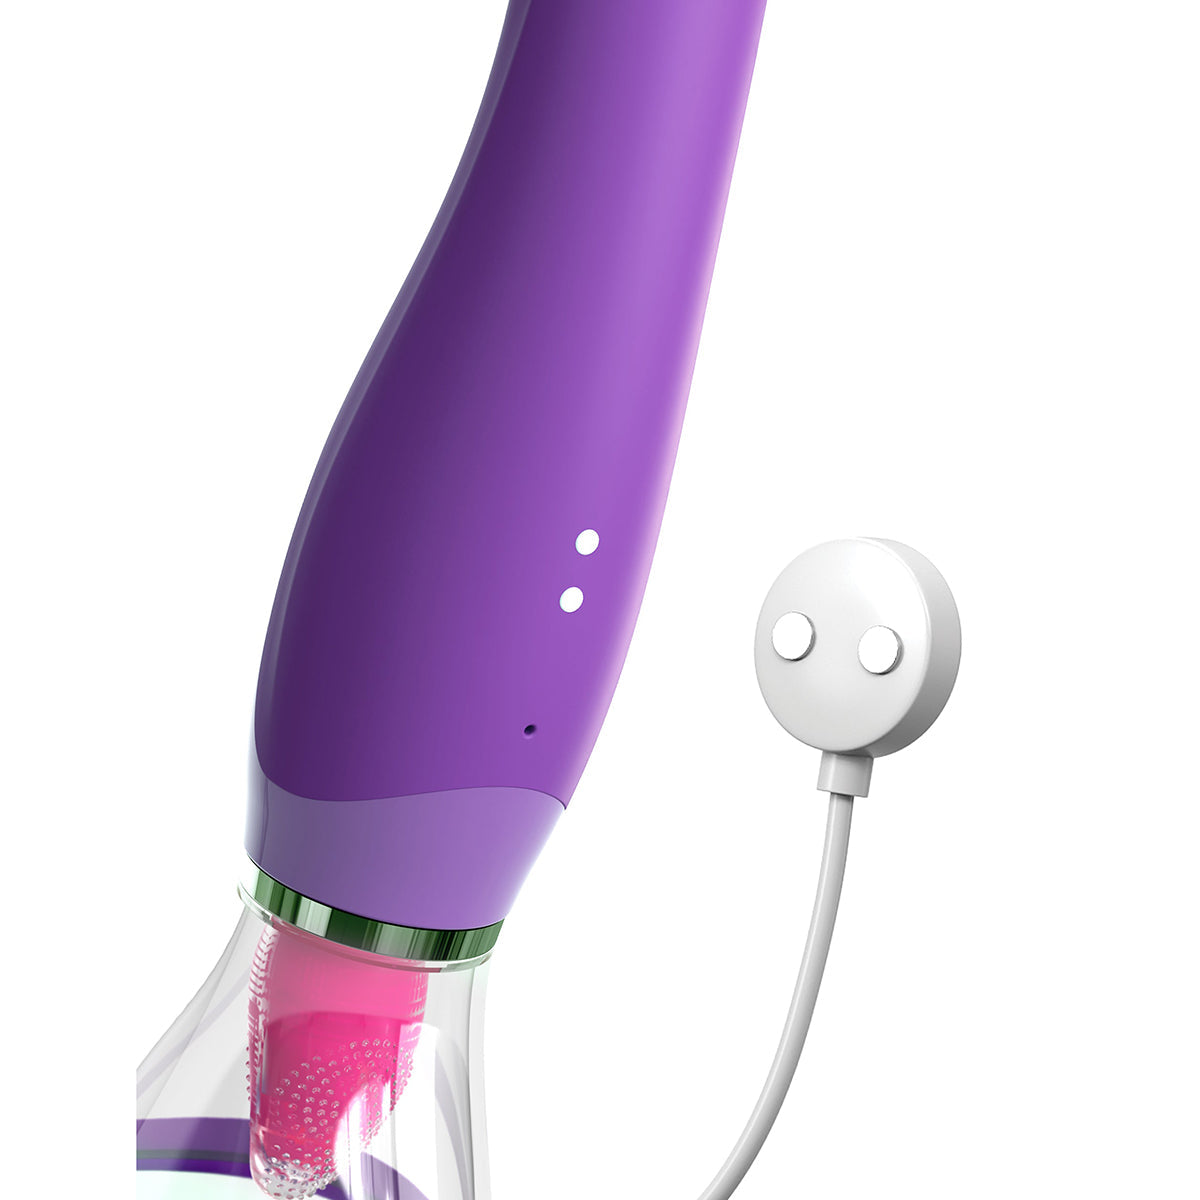 Fantasy For Her Her Ultimate Pleasure Double Ended Vibrator